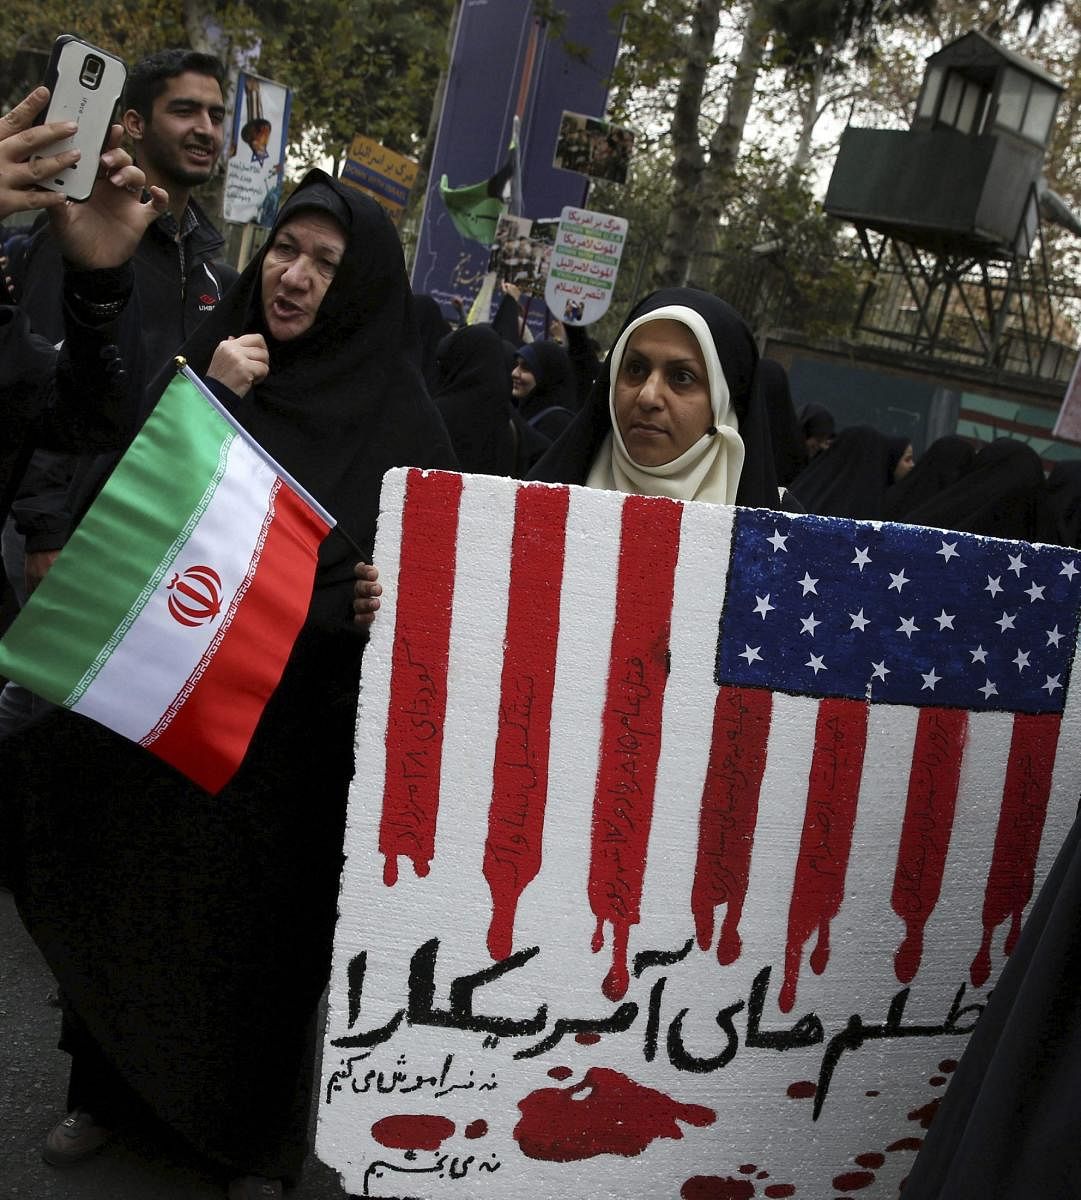 An Iranian demonstrator holds an anti-U.S. placard with writing in Persian which reads: "We'll neither forget, nor forgive cruelties of America," in an annual gathering in front of the former U.S. Embassy marking the anniversary of its 1979 takeover, in Tehran.